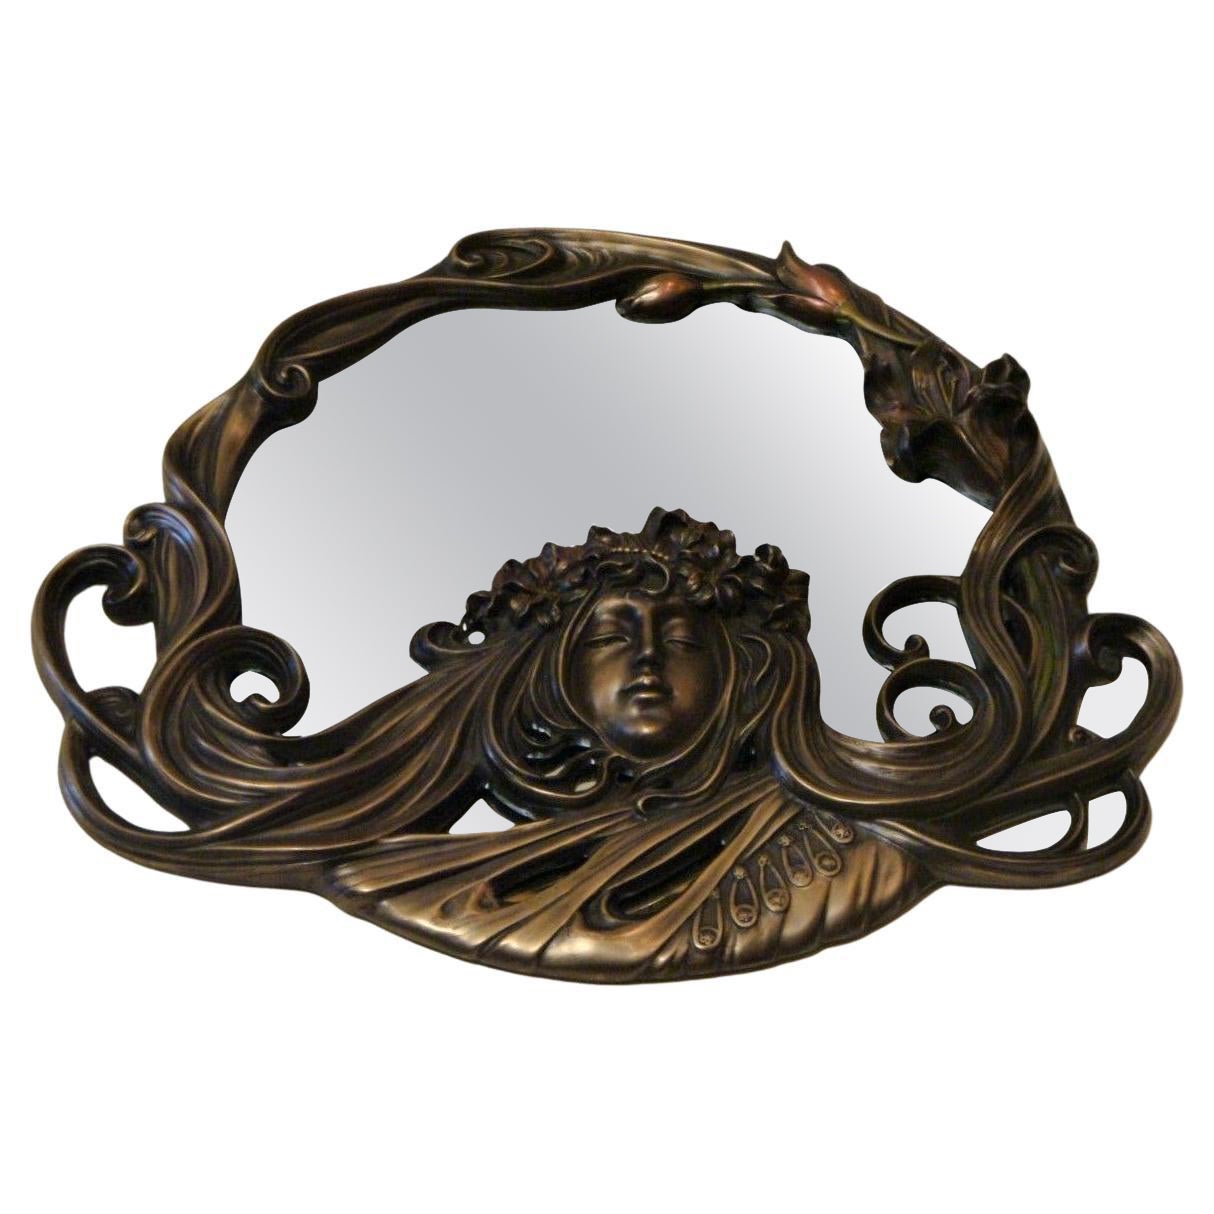 Rare Estate Spectacular Ornate Carved Handpainted Bronze Resin Deco Style Mirror For Sale